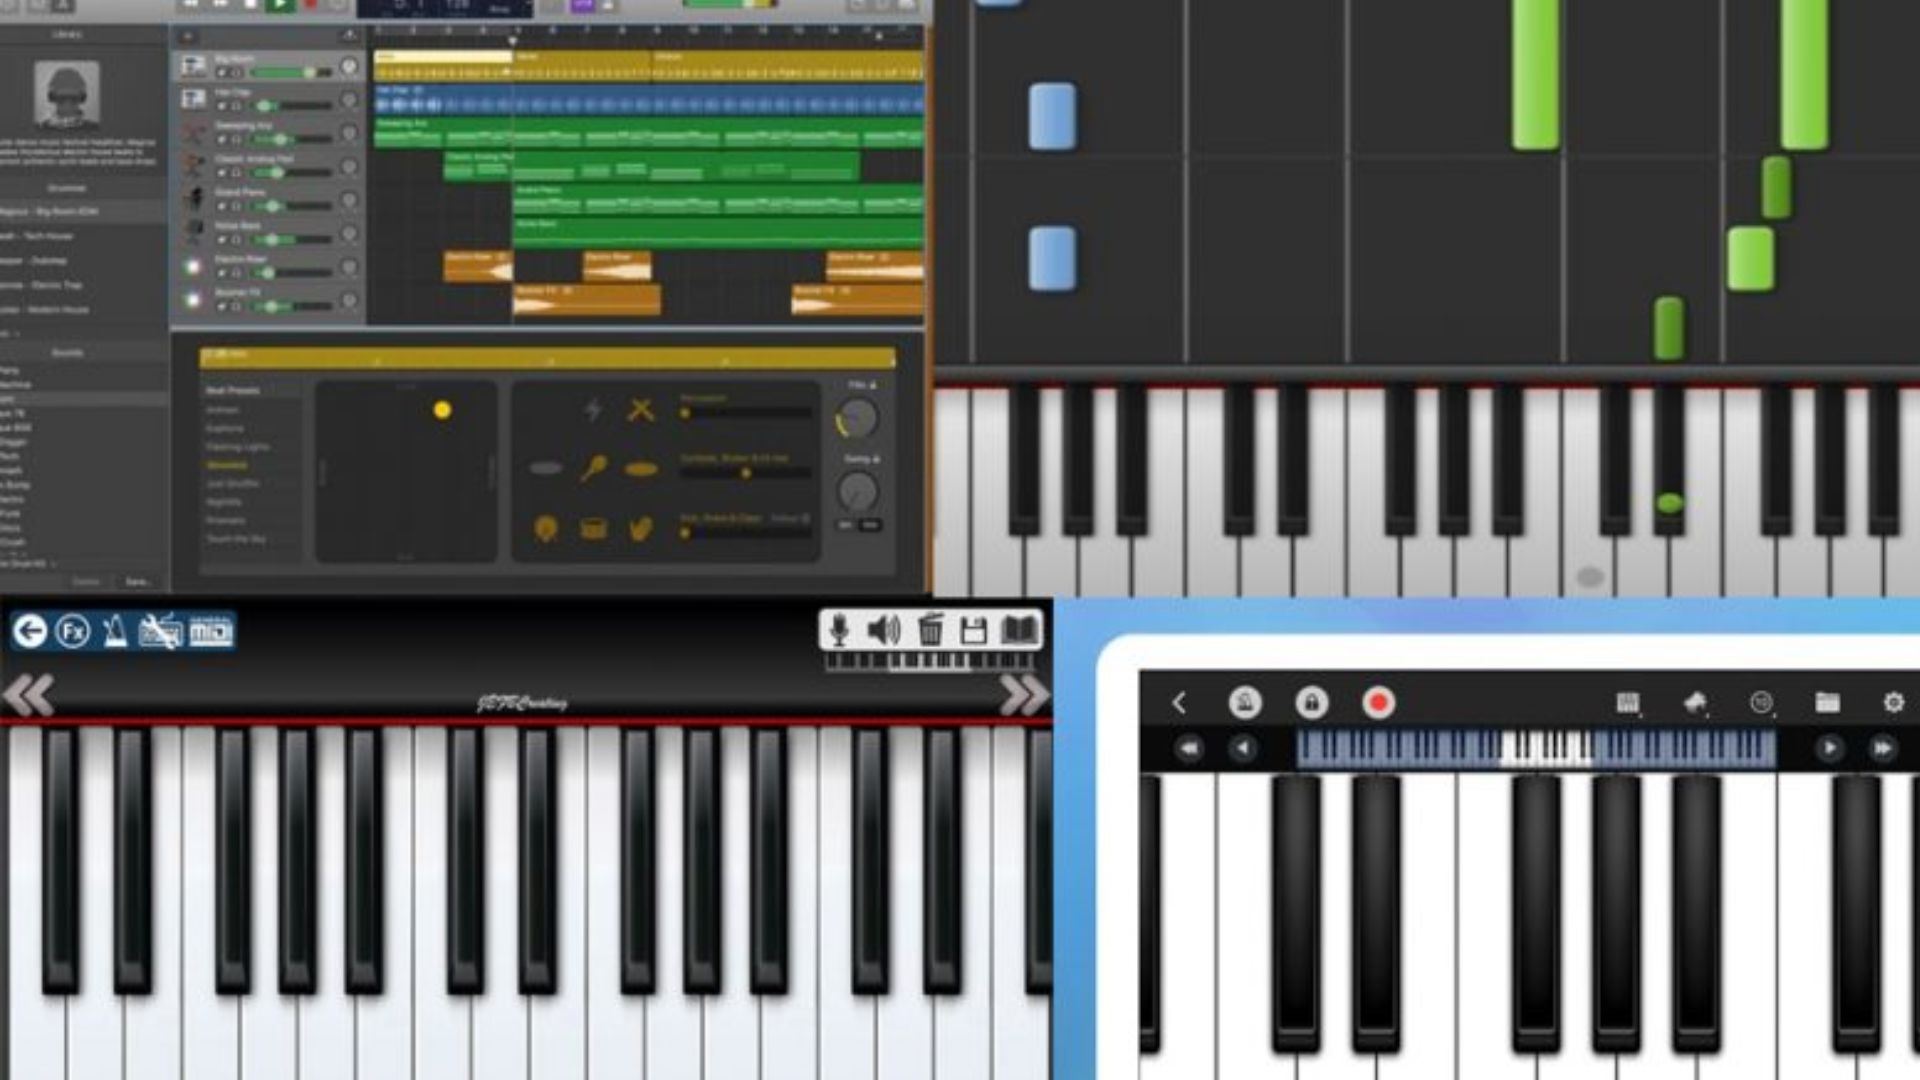 12 Best Free Midi Keyboard Software For Windows PC, Mac, IPhone And Android